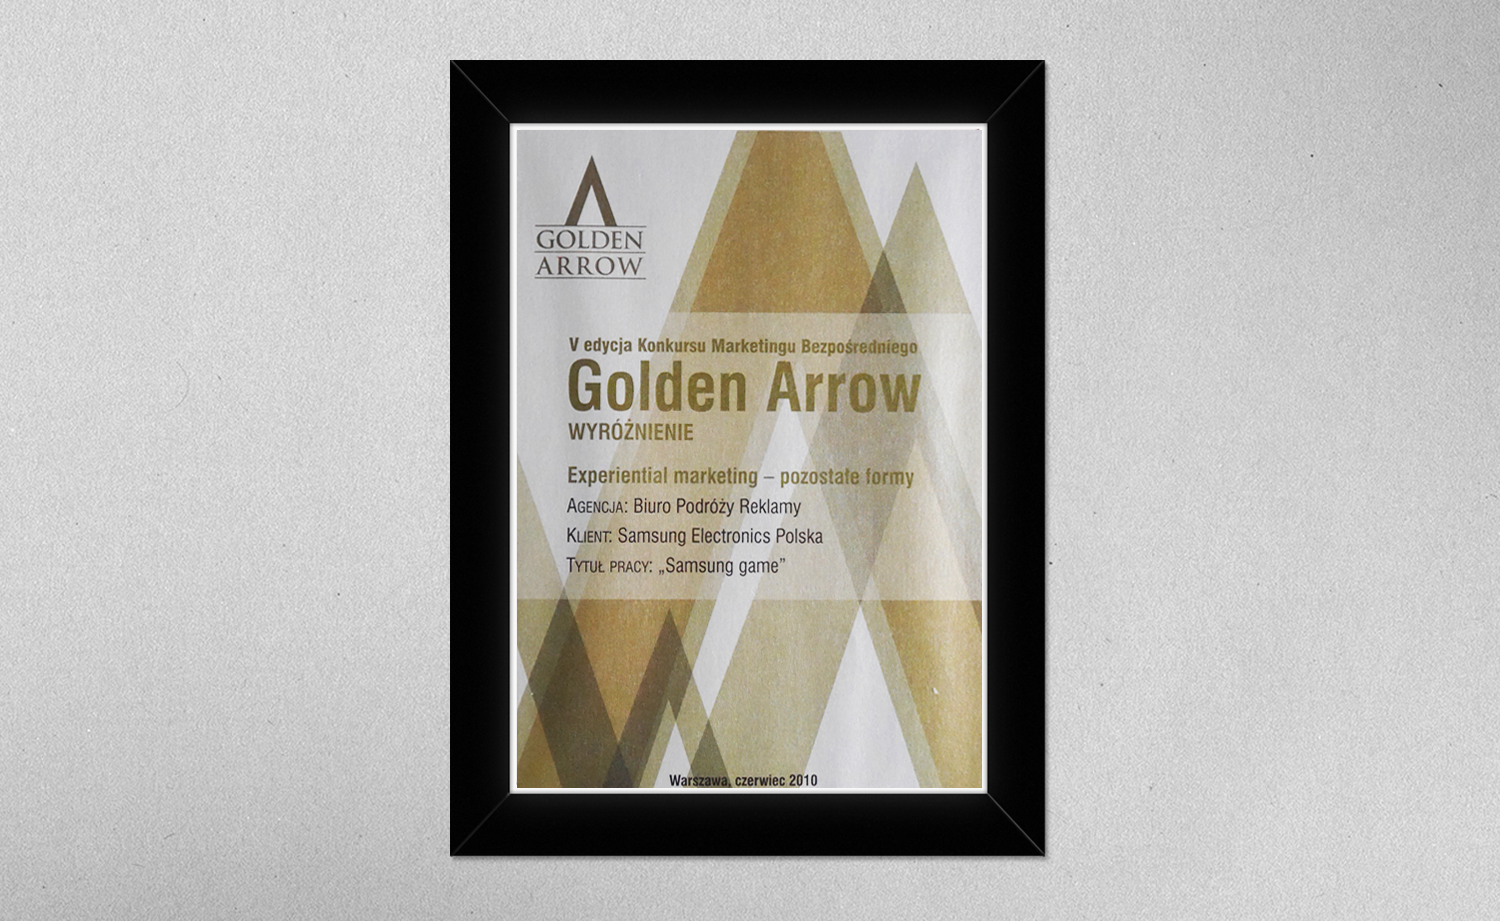 Award in the Golden Arrow competition